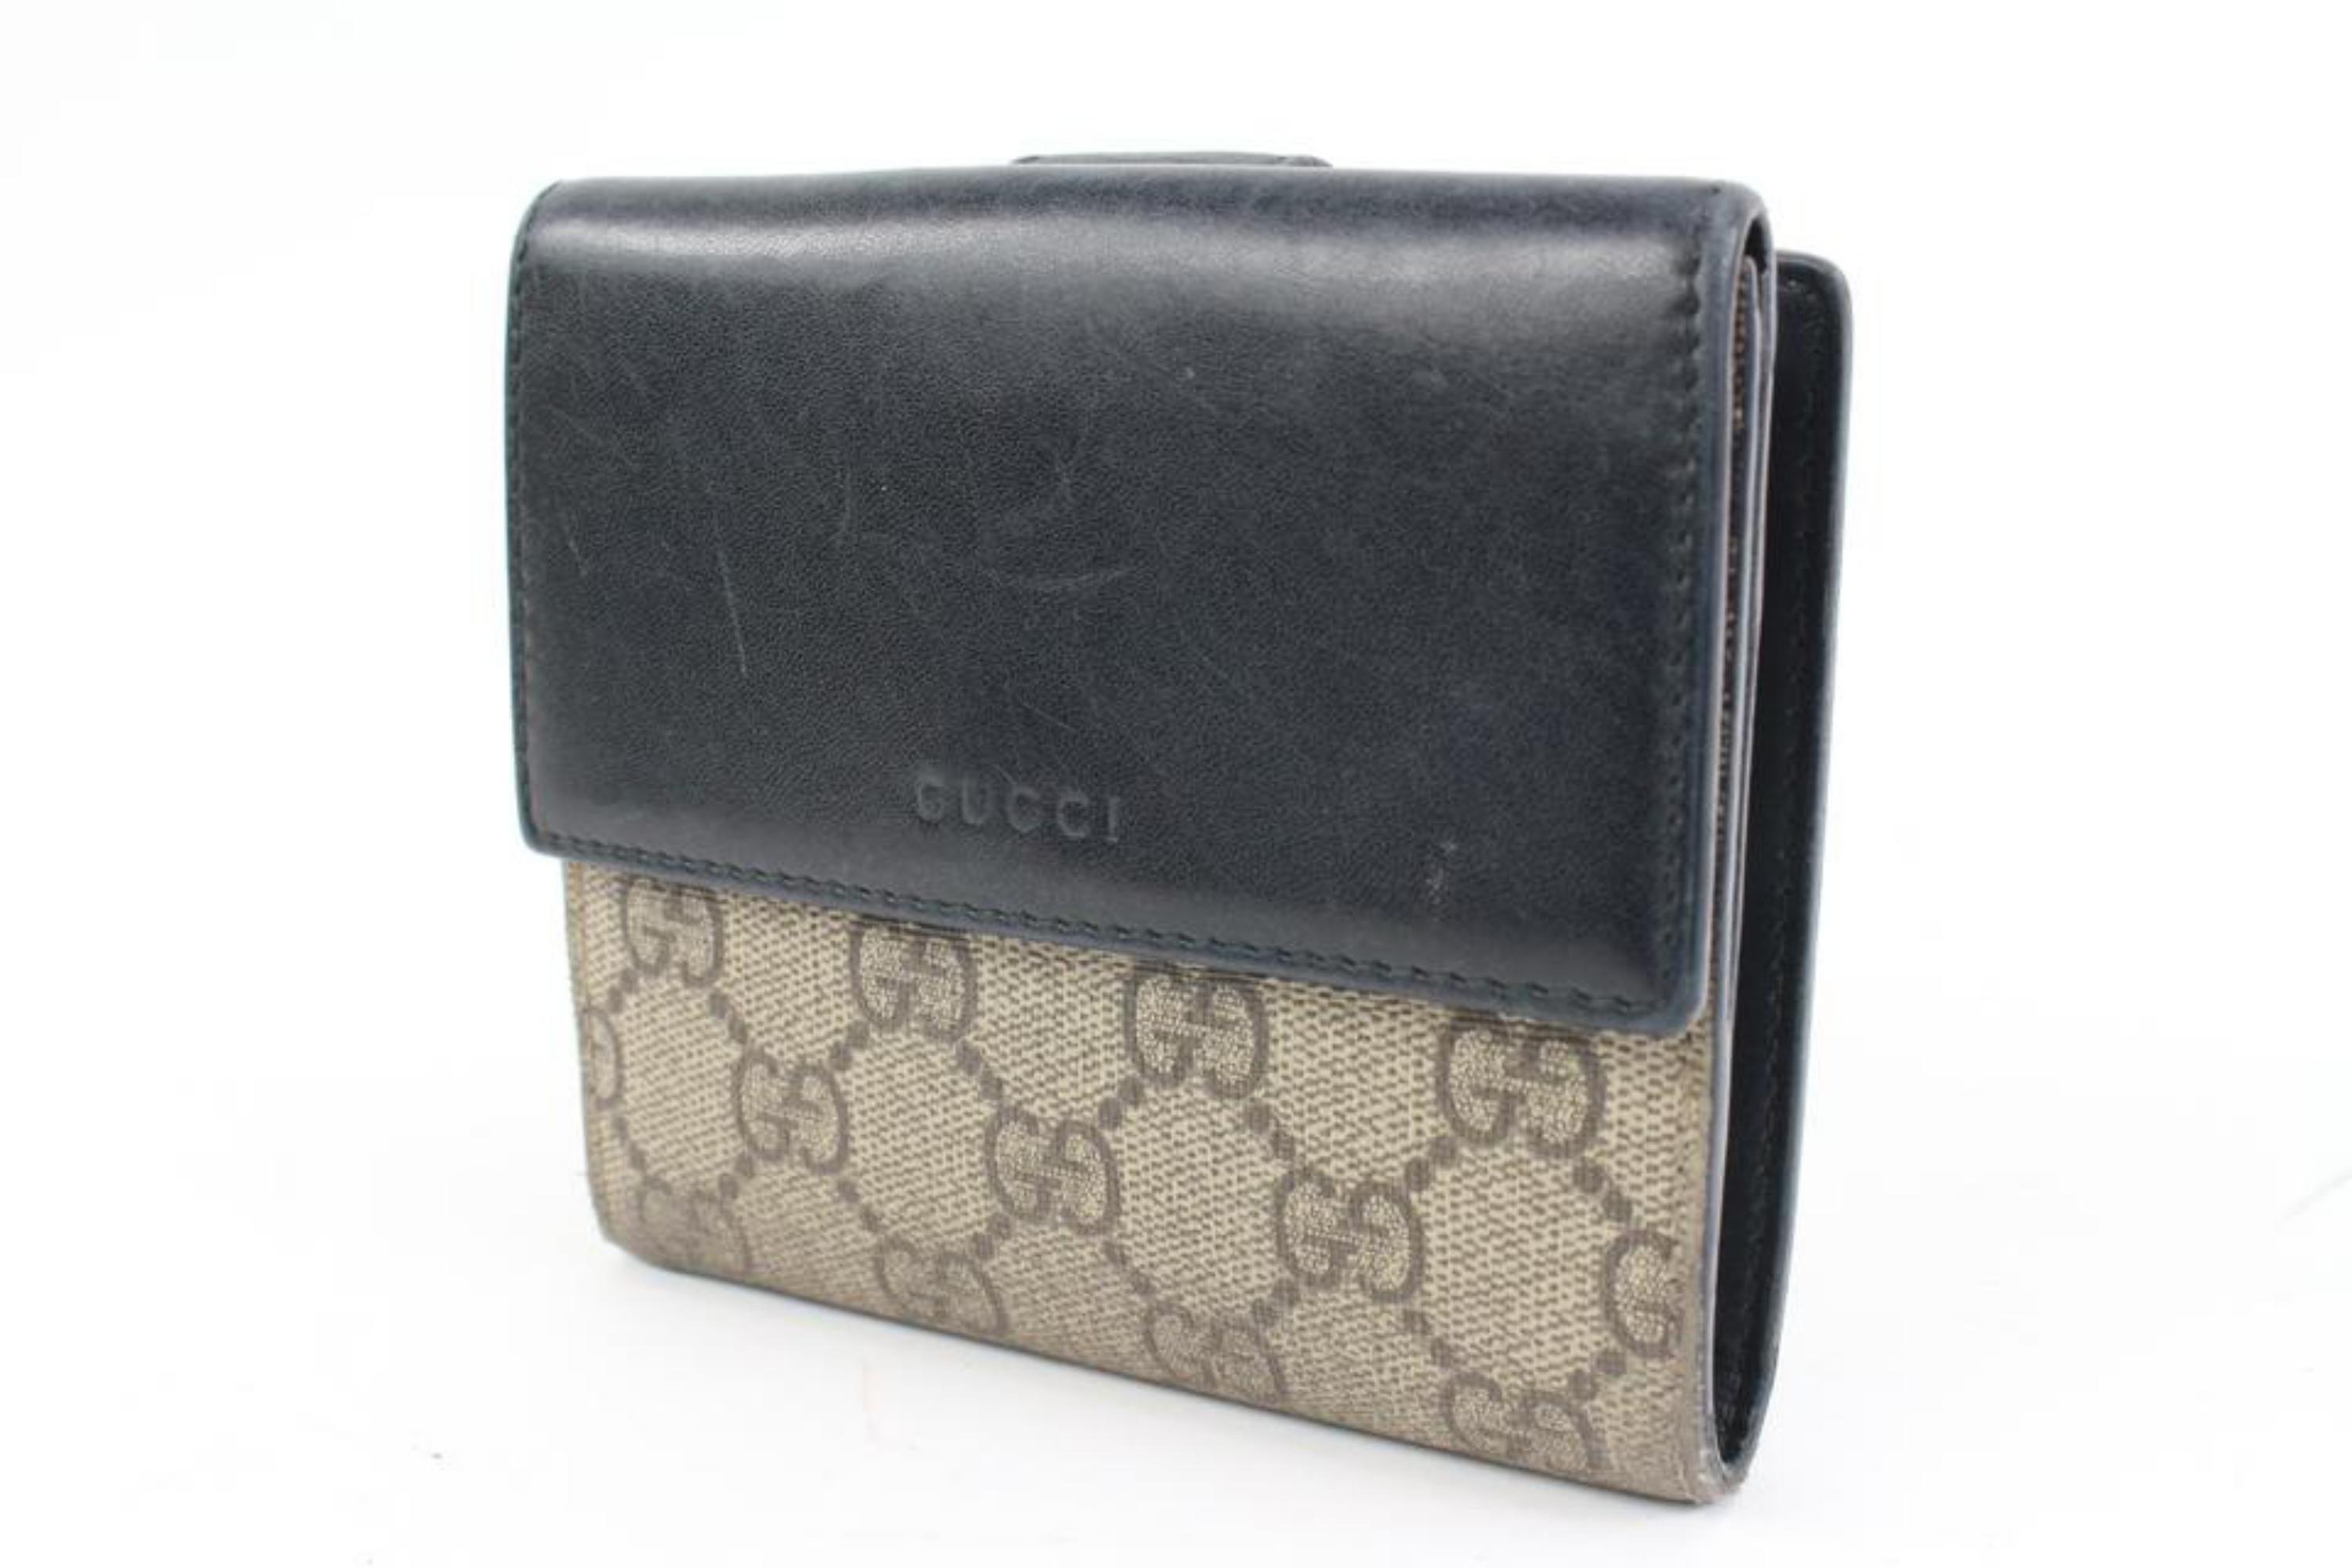 Gucci Beige x Black Supreme GG Compact Wallet 24g321s
Date Code/Serial Number: 41010-2184
Made In: Italy
Measurements: Length:  4.75